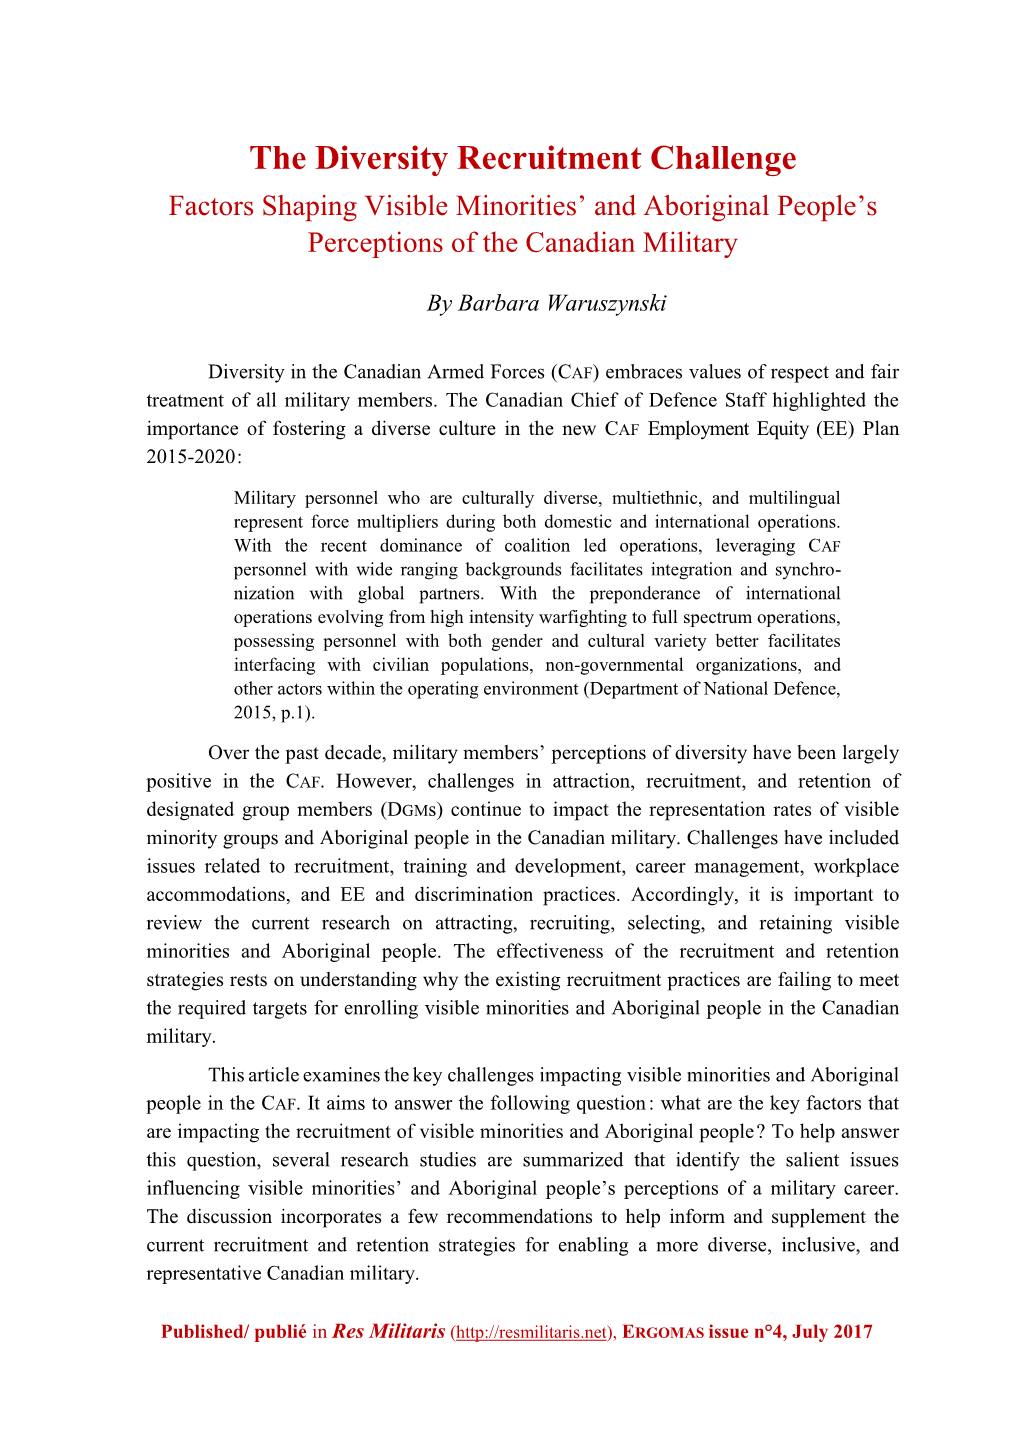 The Diversity Recruitment Challenge Factors Shaping Visible Minorities’ and Aboriginal People’S Perceptions of the Canadian Military